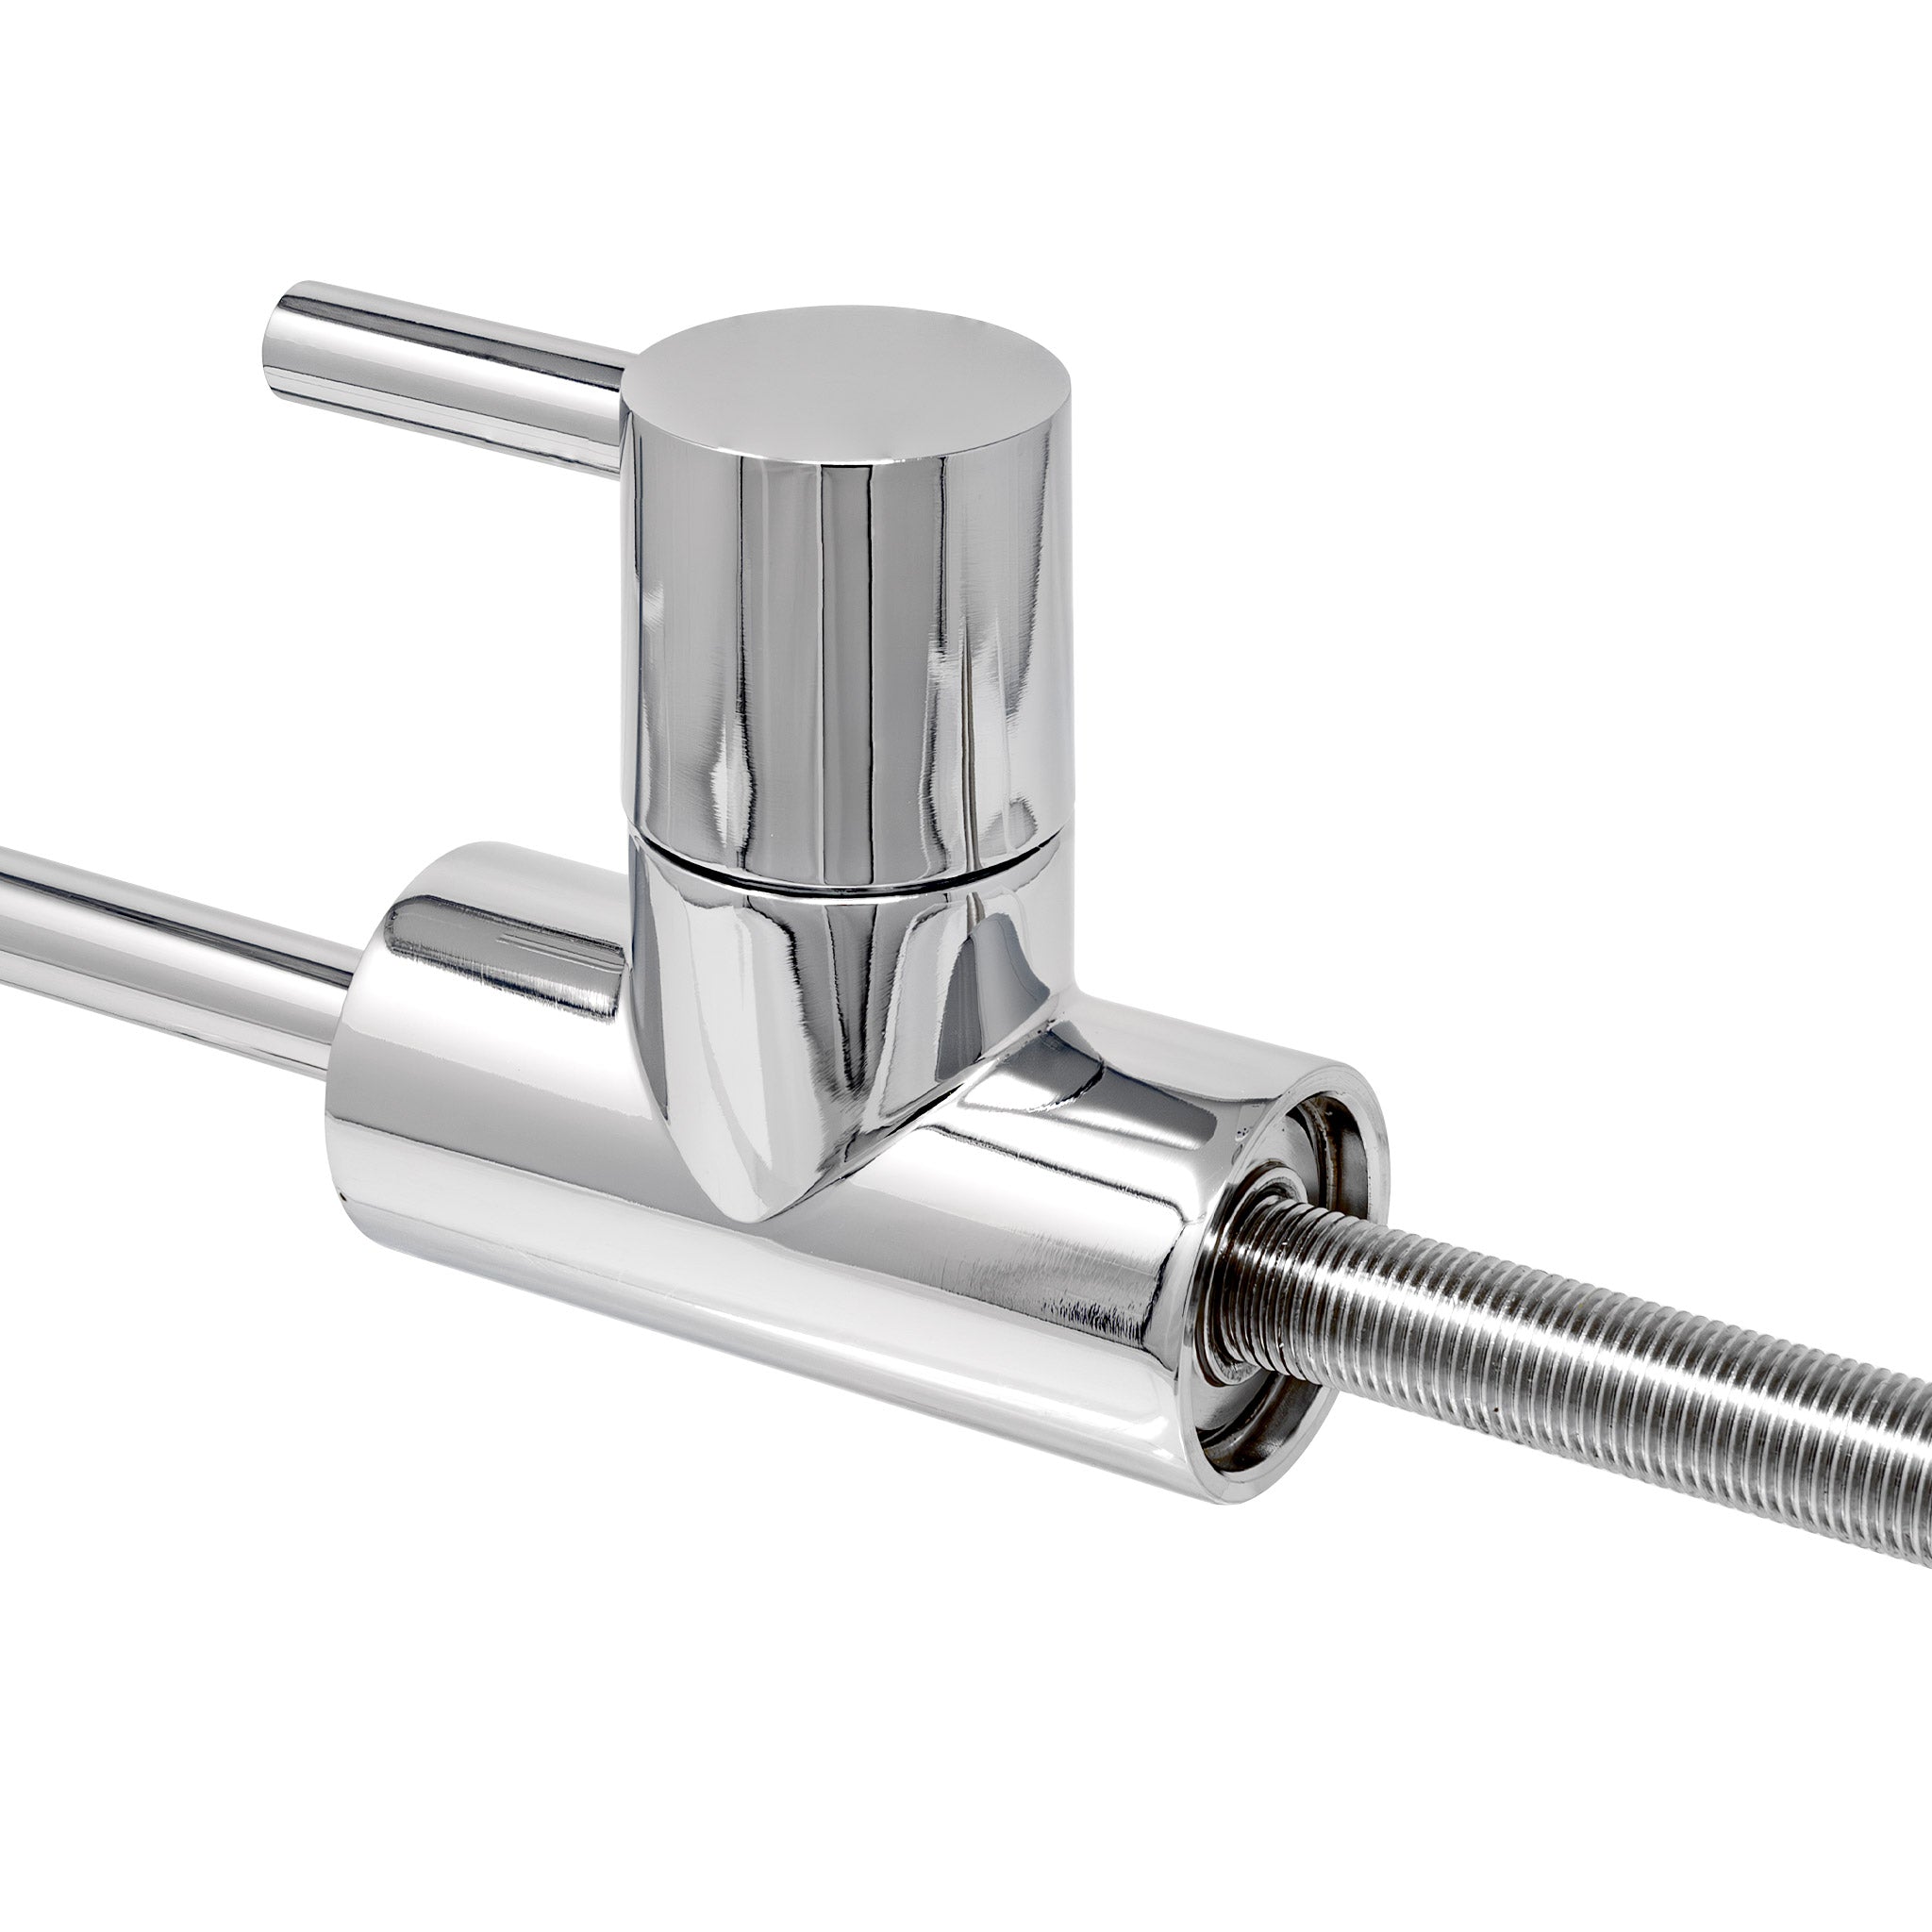 Water Filtration Faucet Chrome Euro Style Reverse Osmosis Non Air Gap. Certified by NSF.